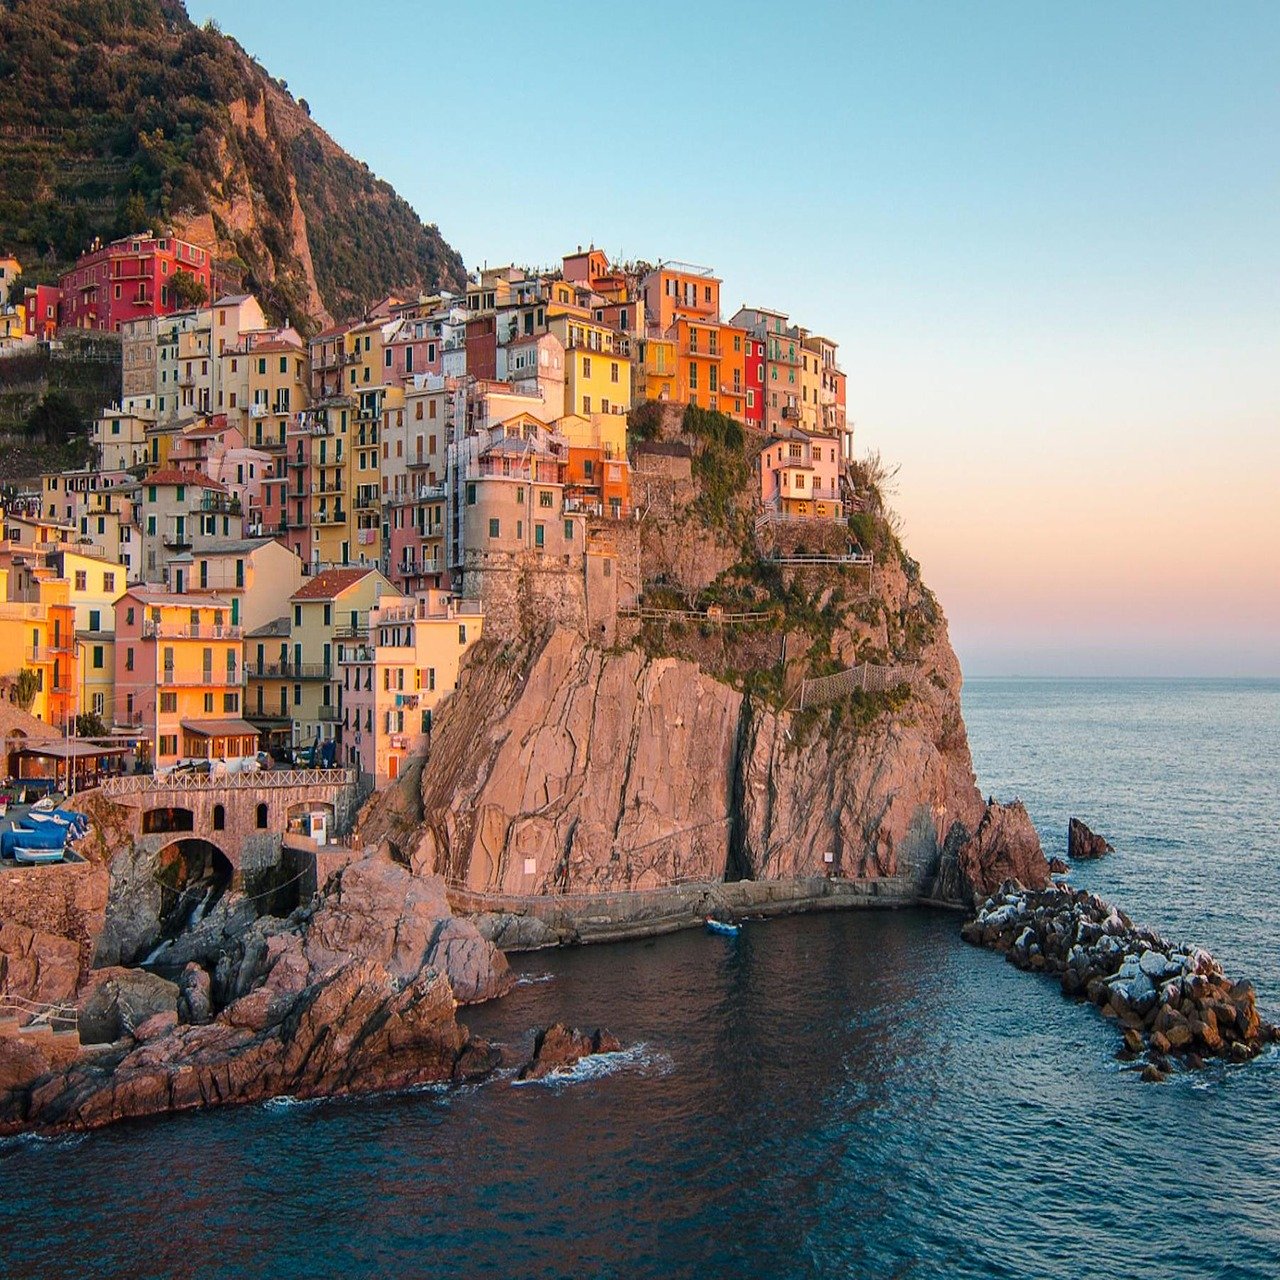 Cinque Terre is one of the most beautiful spots in Italy